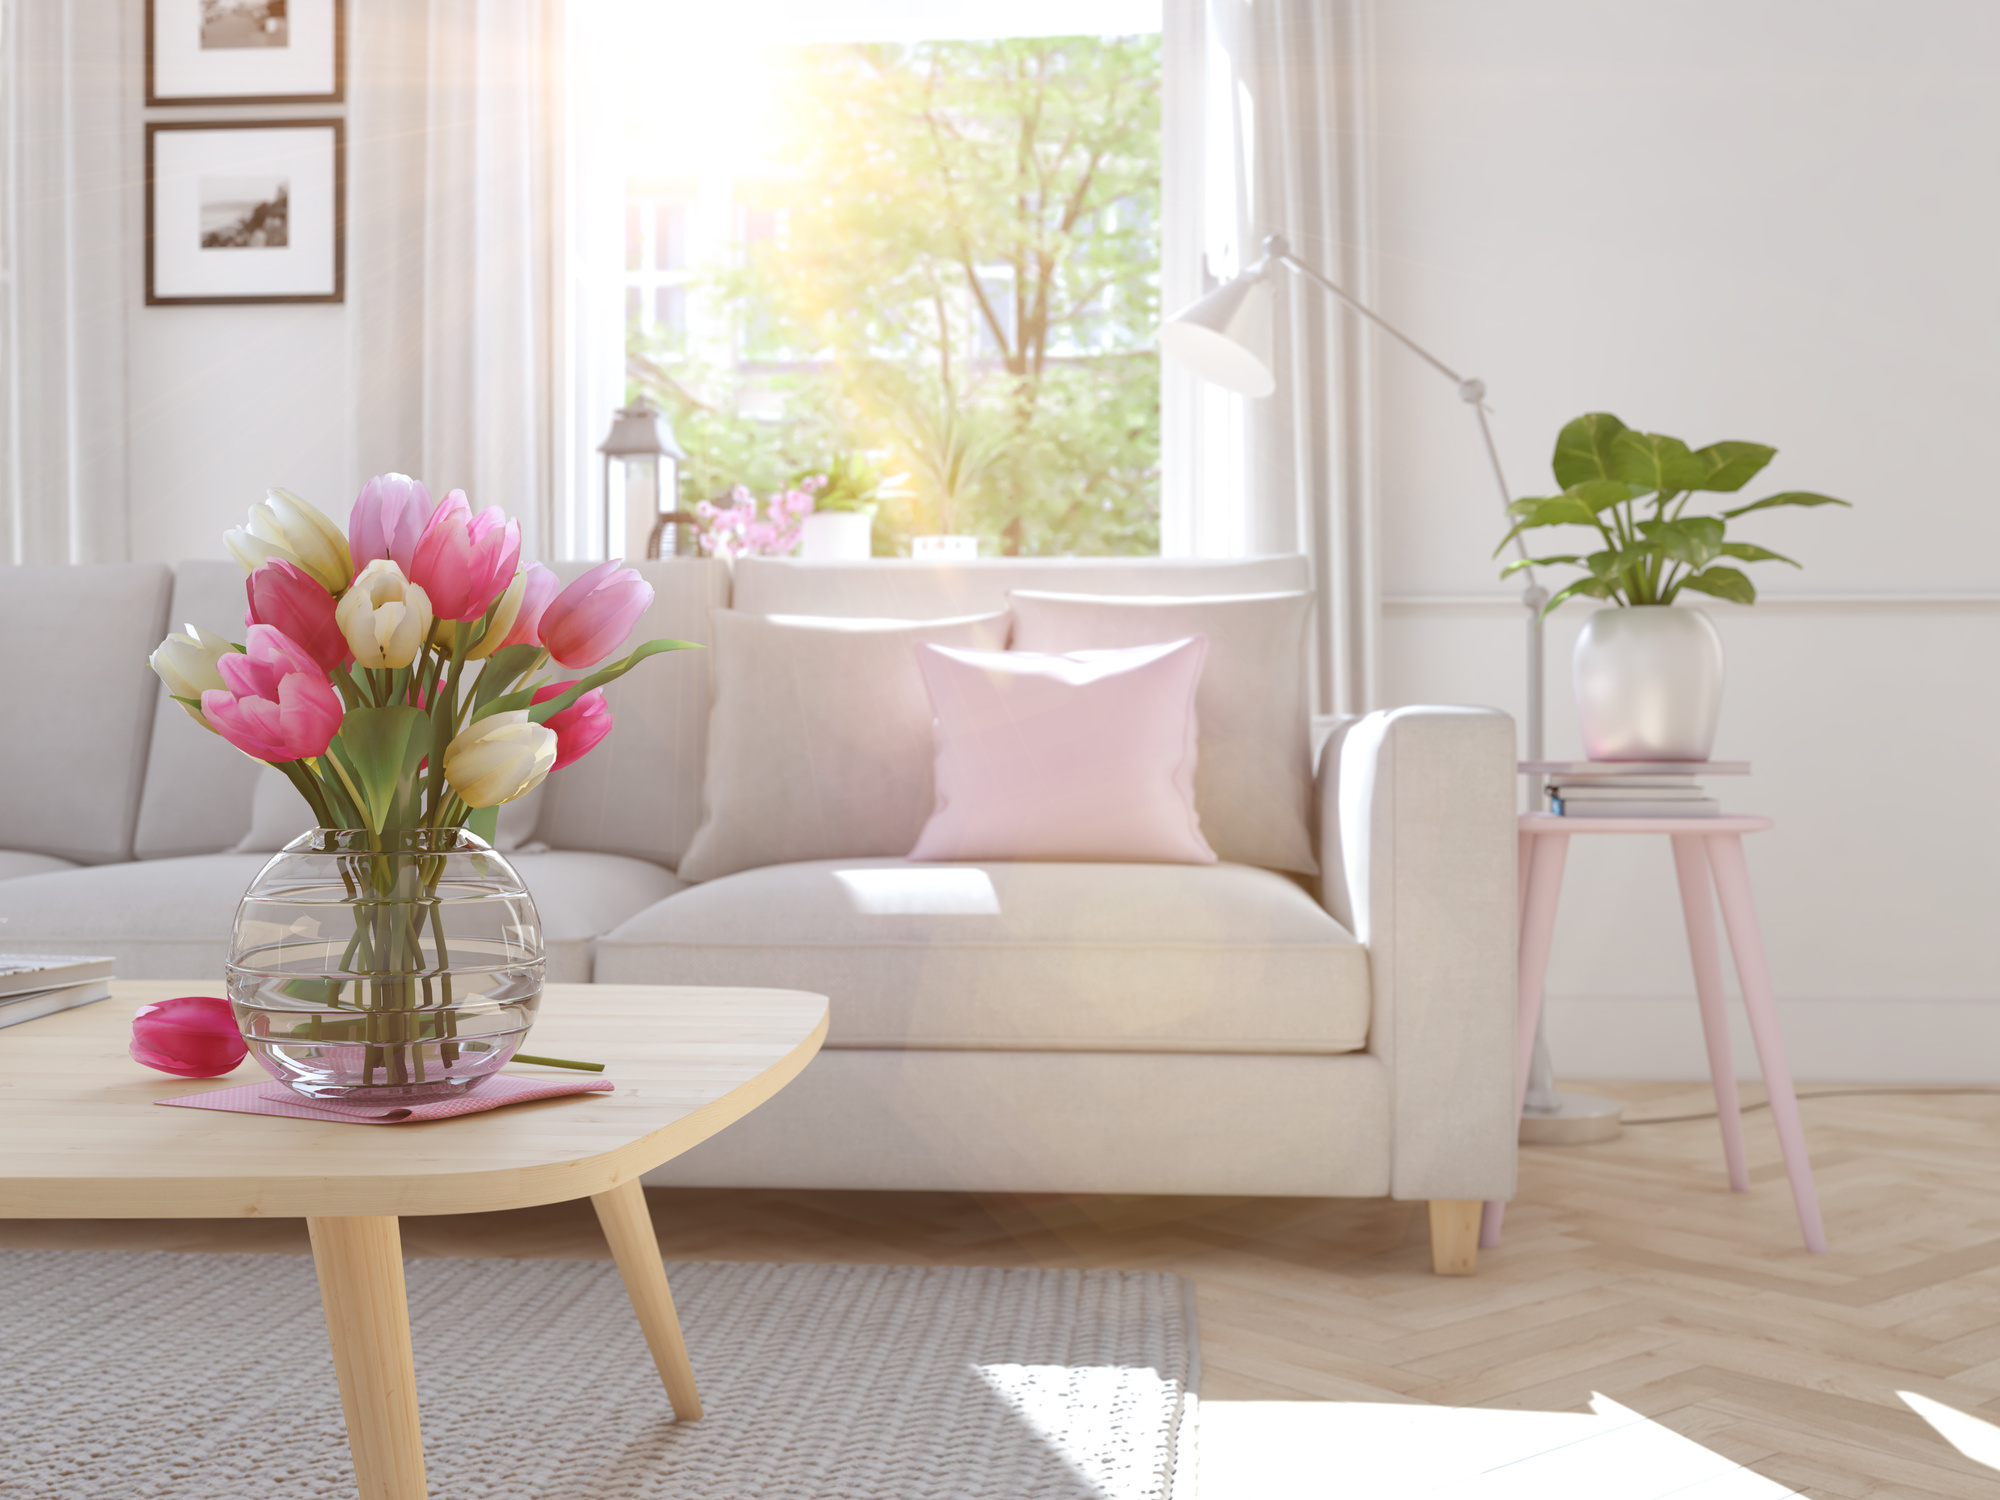 8 Simple Decorating Tips to Beautify Your Home - Sparkle and Shine Blog